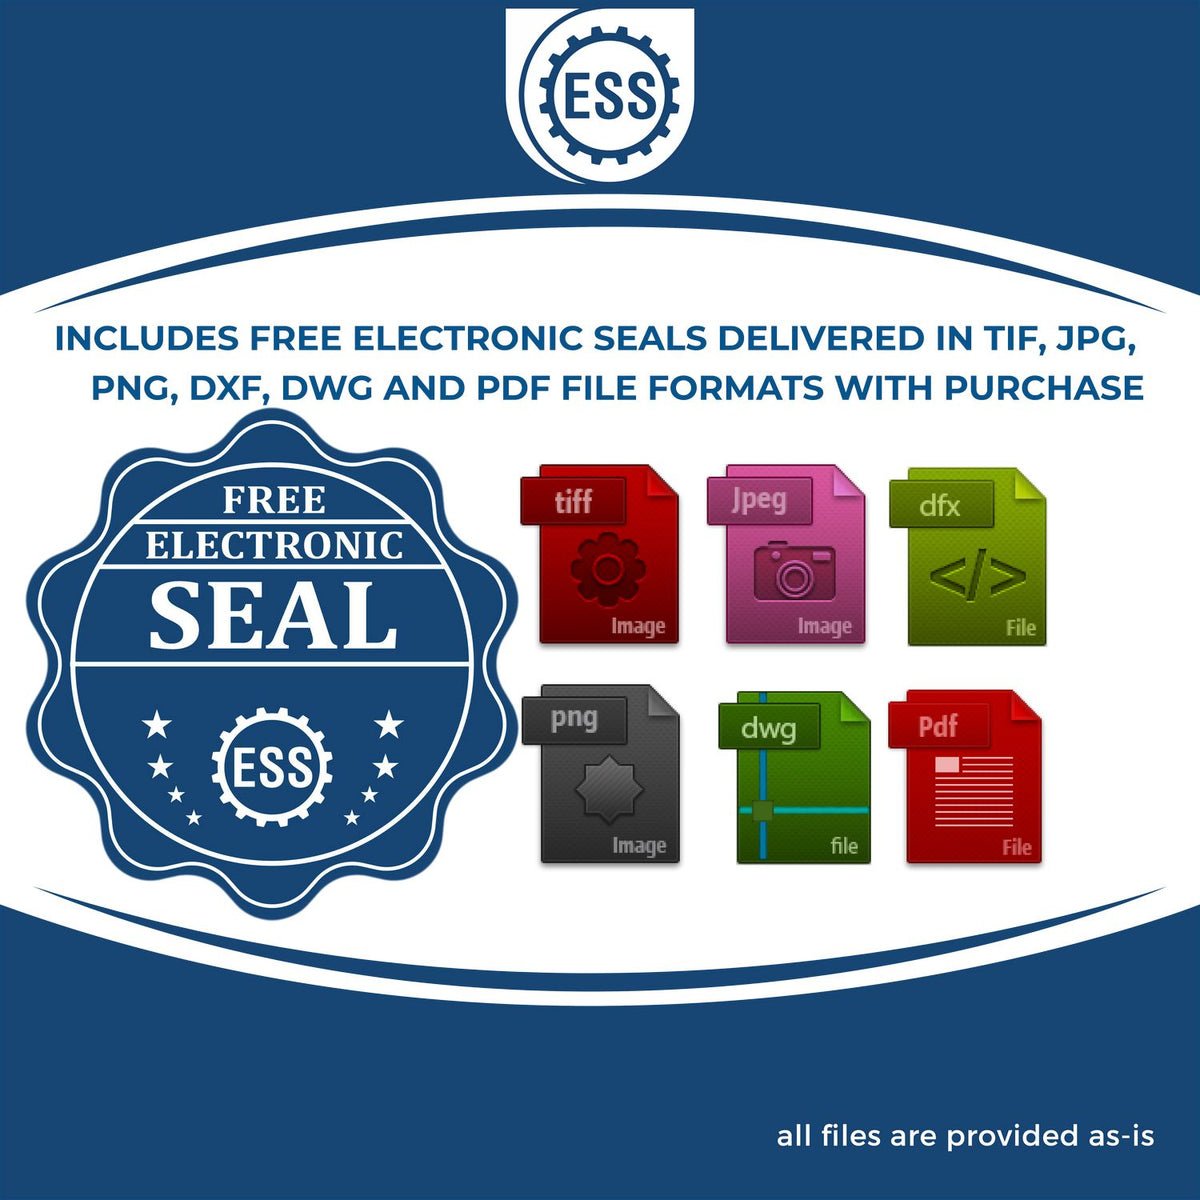 An infographic for the free electronic seal for the Long Reach Kentucky Geology Seal illustrating the different file type icons such as DXF, DWG, TIF, JPG and PNG.